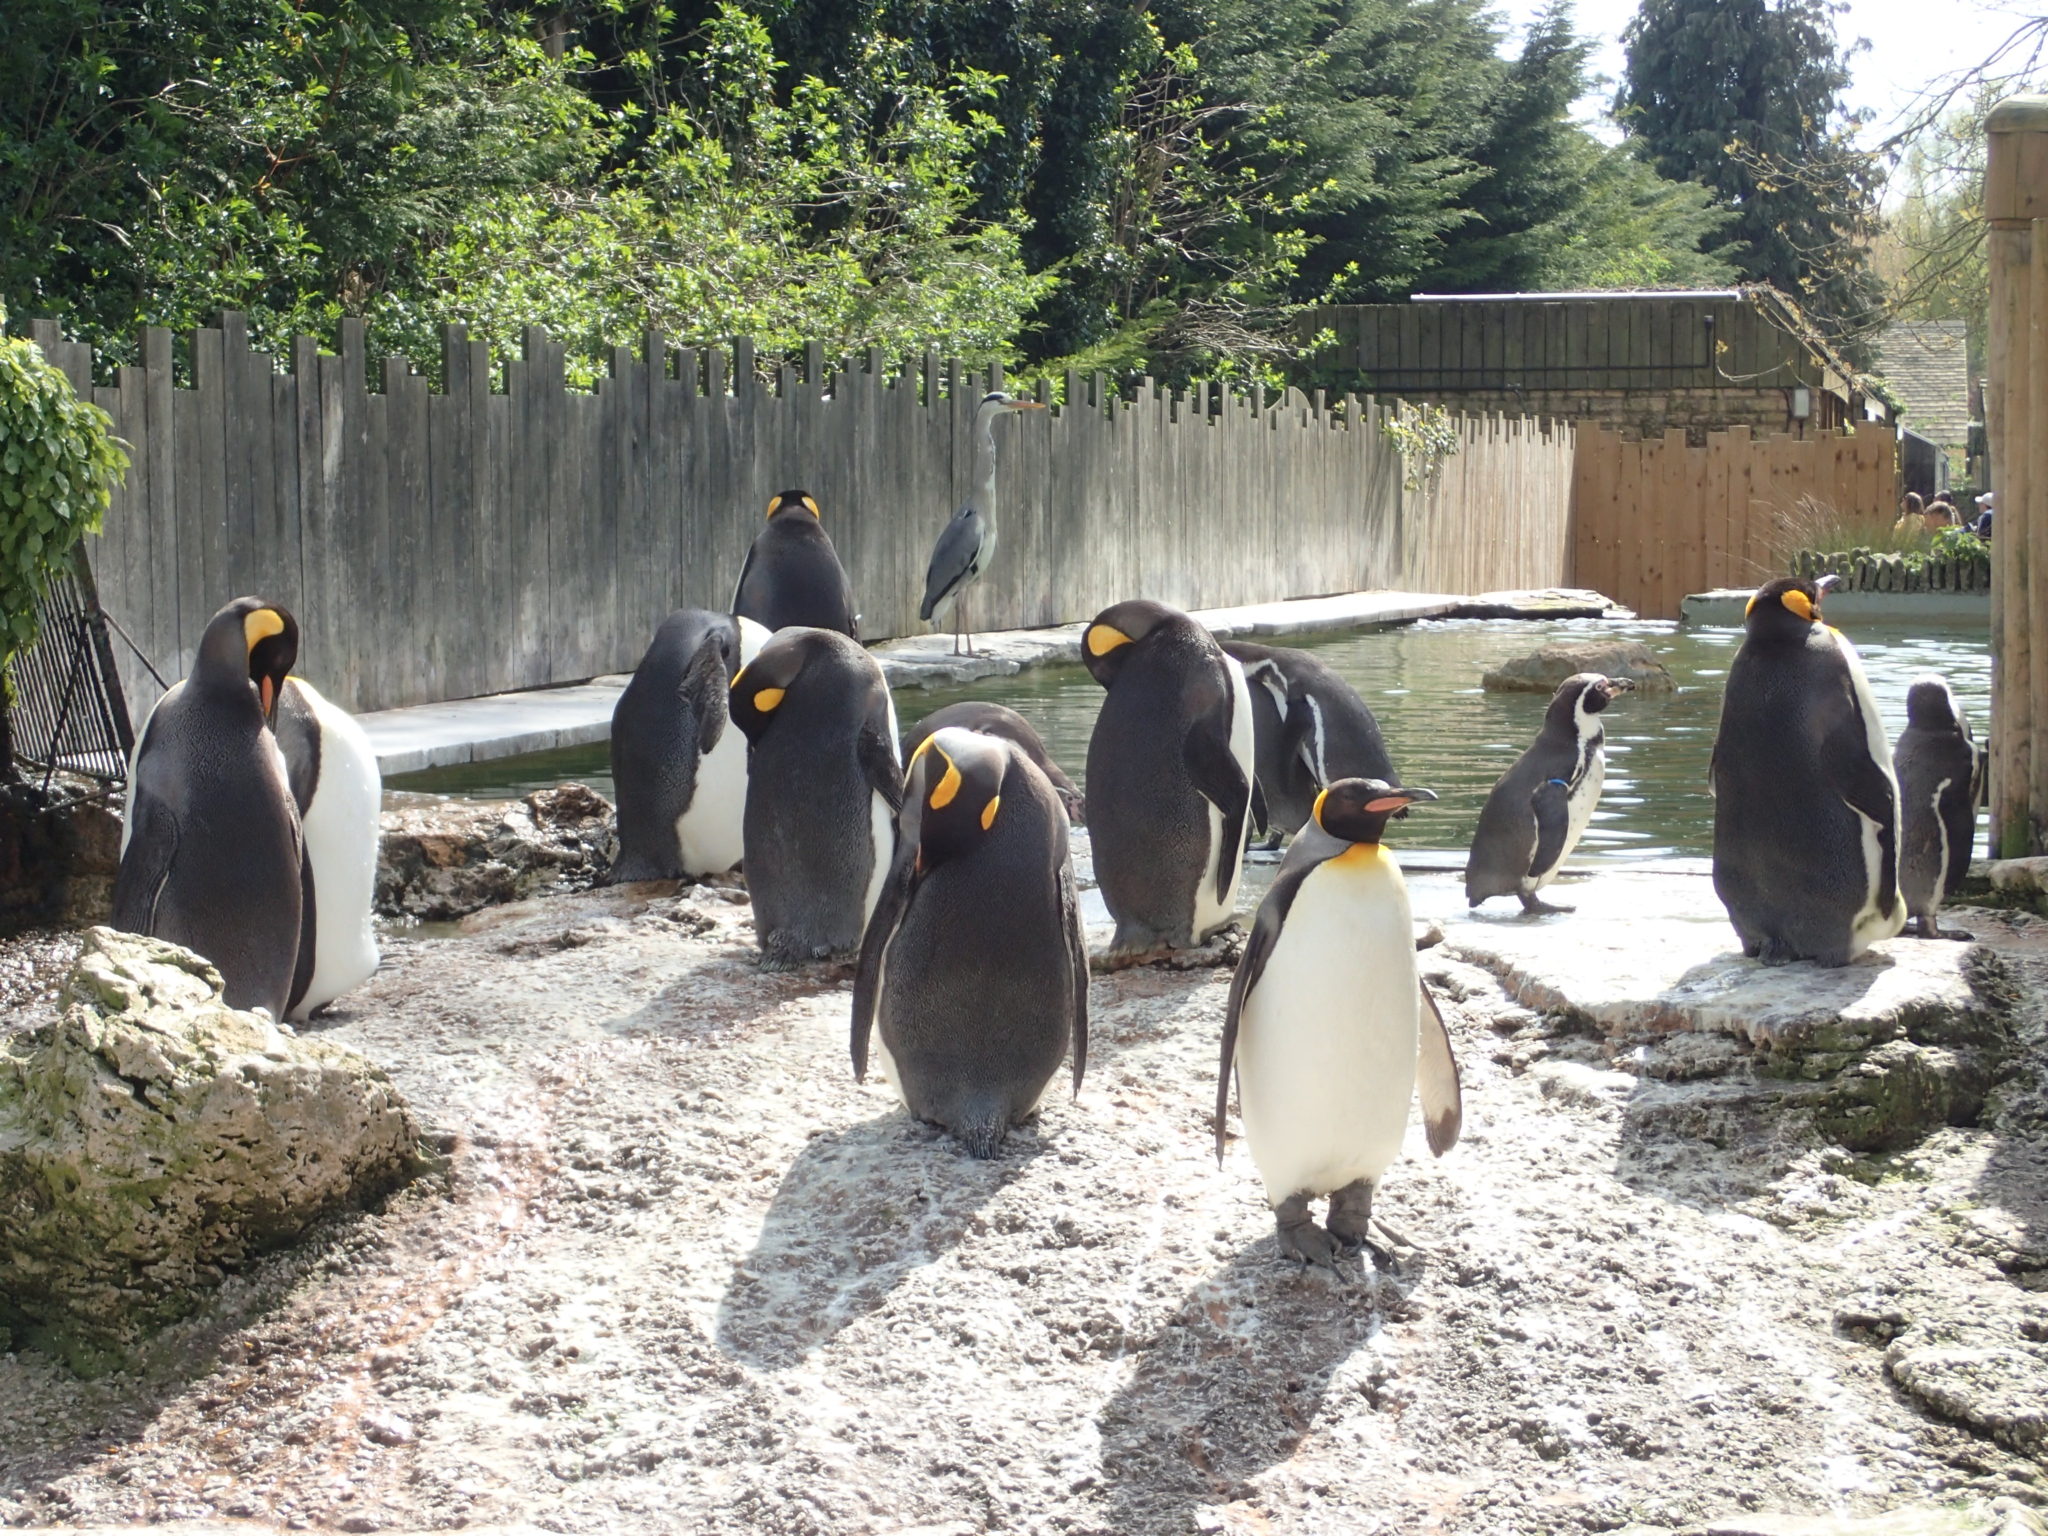 Penguins at Birdland in the Cotswolds, great day out with the kids